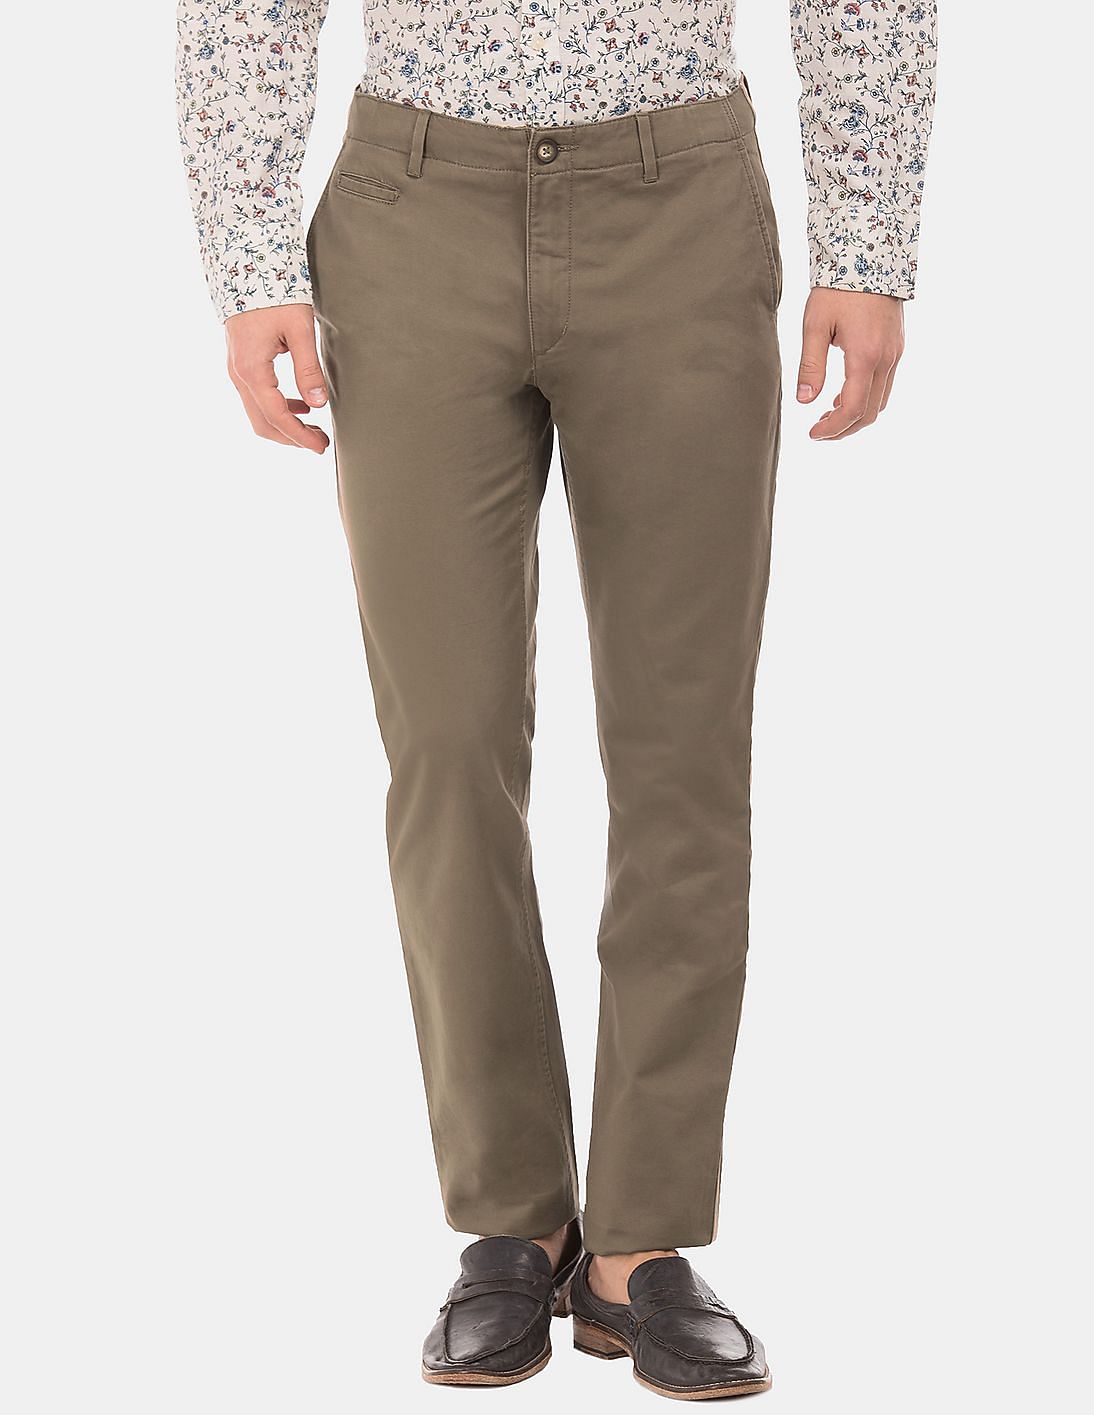 Buy U.S. Polo Assn. Solid Slim Fit Chinos - NNNOW.com